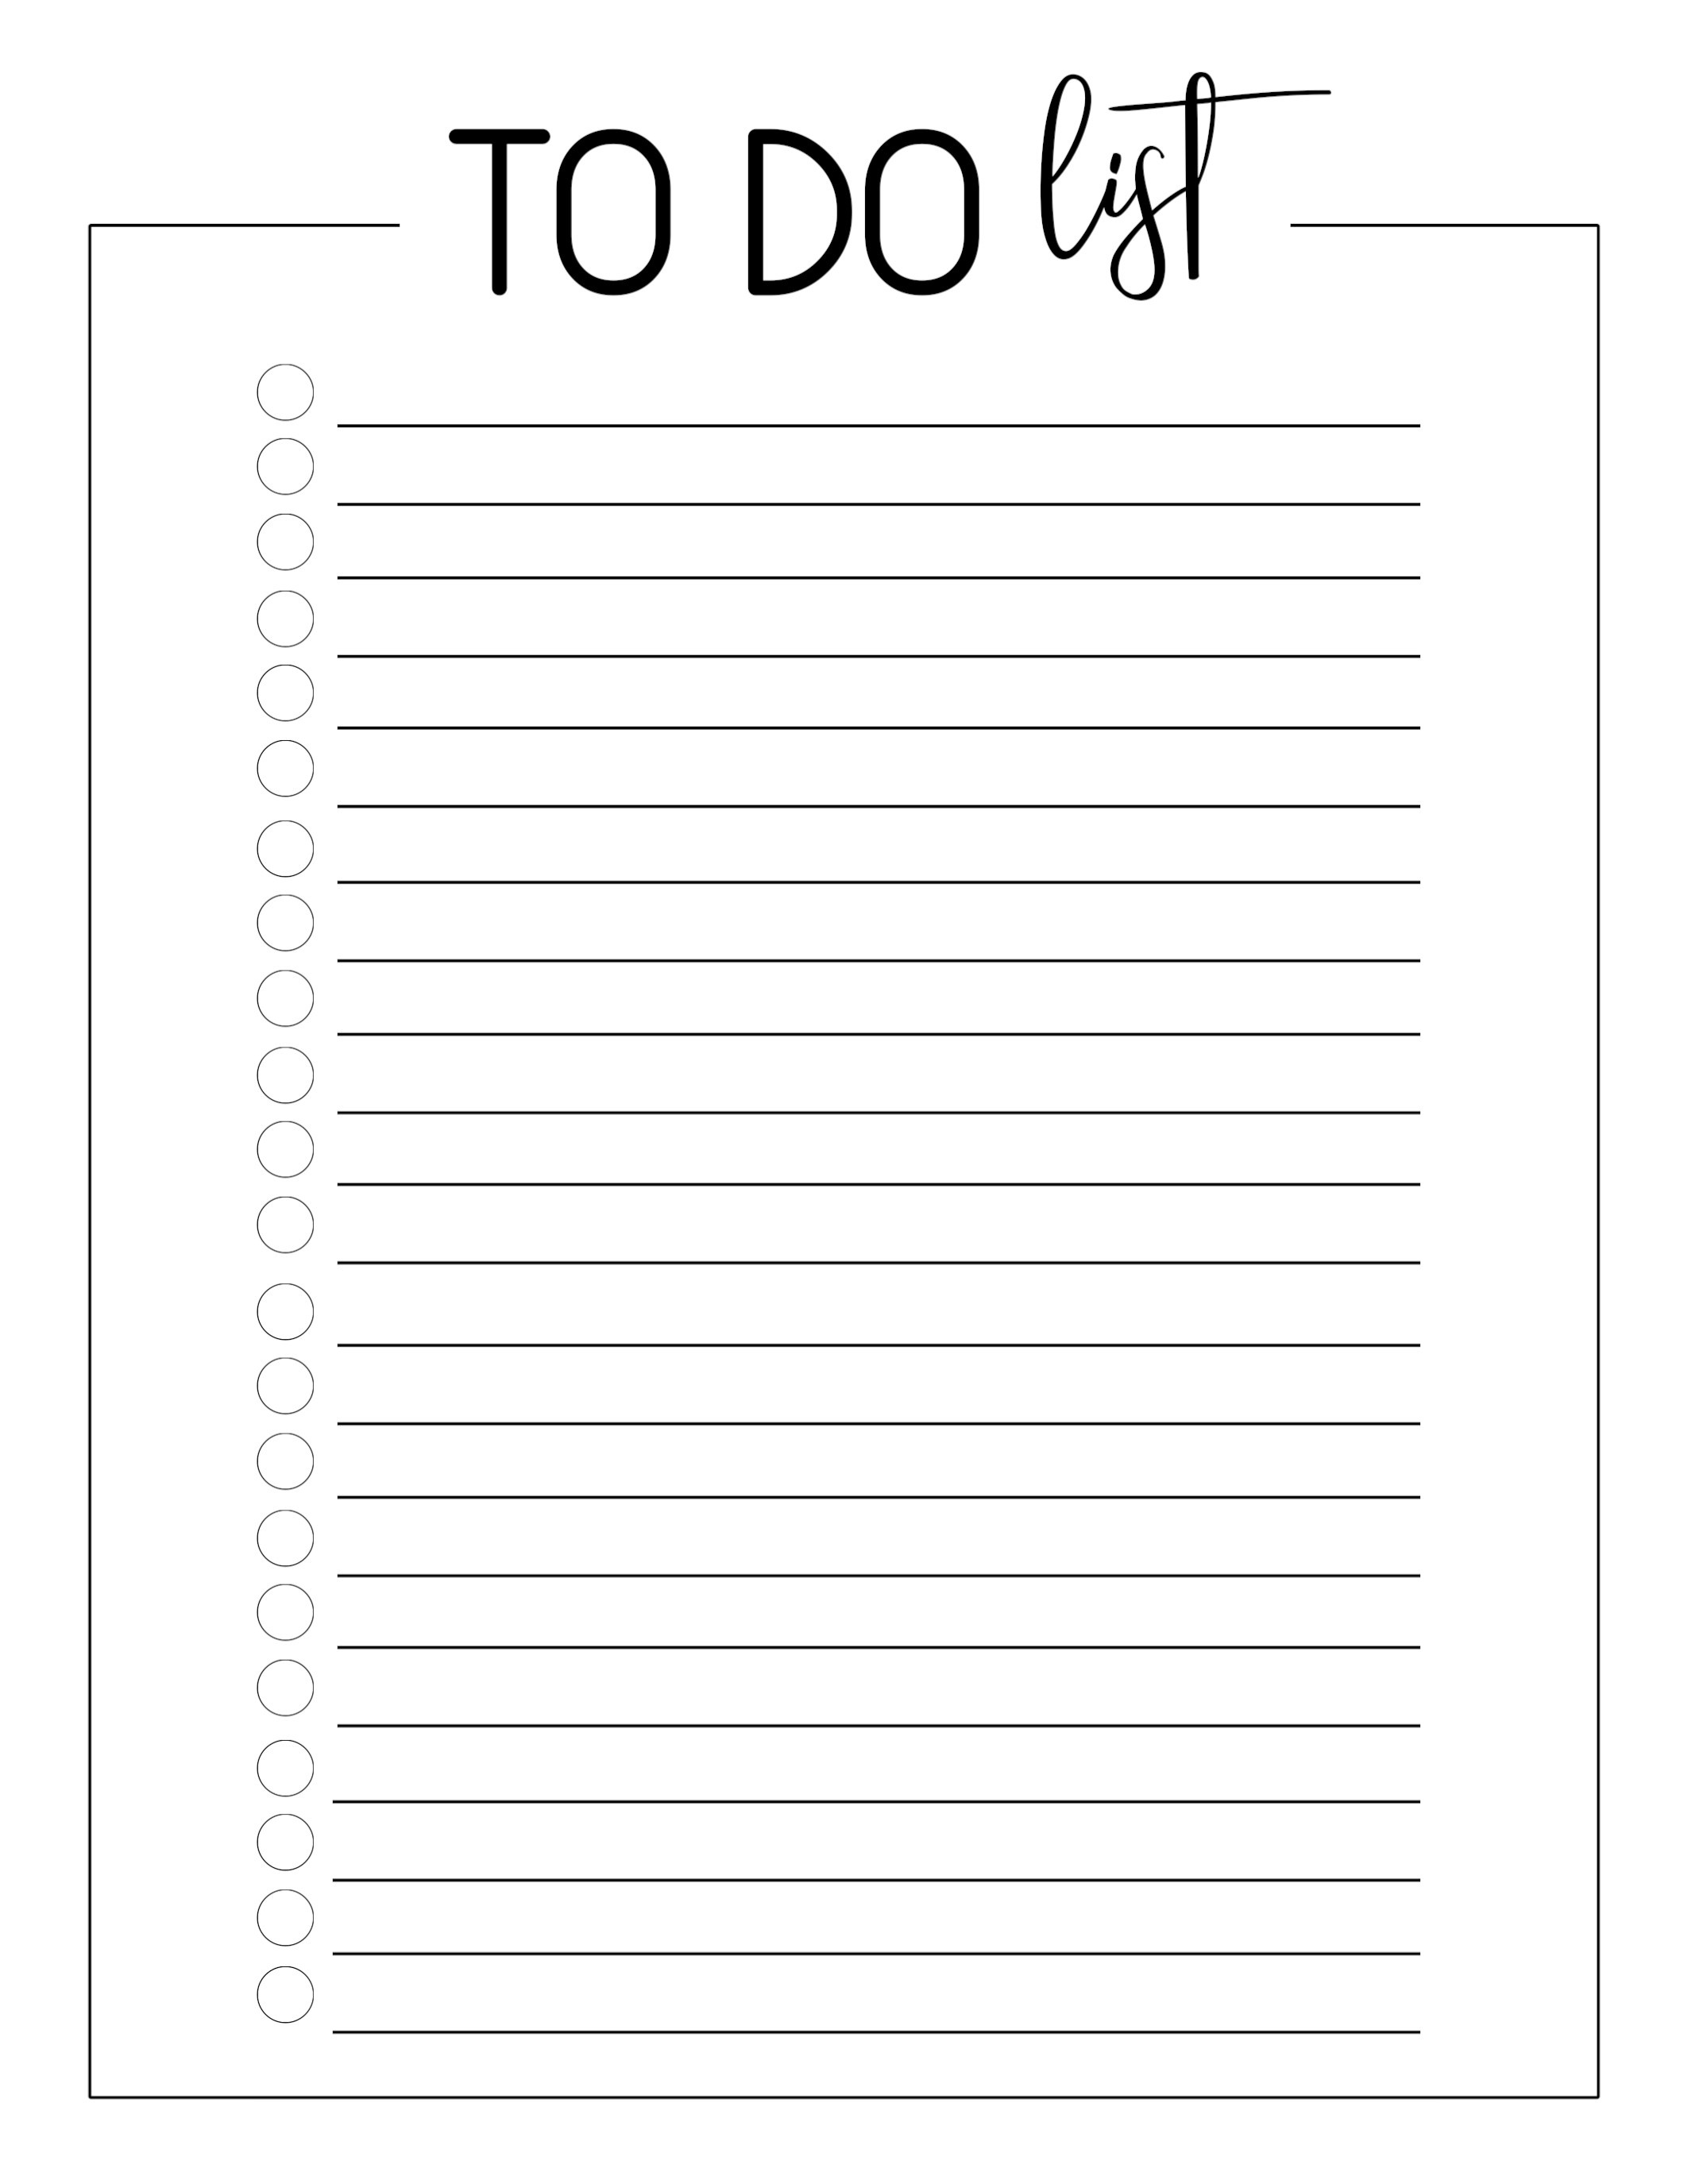 Free Printable To Do Checklist Template - Paper Trail Design - Free To Do List Template Printable